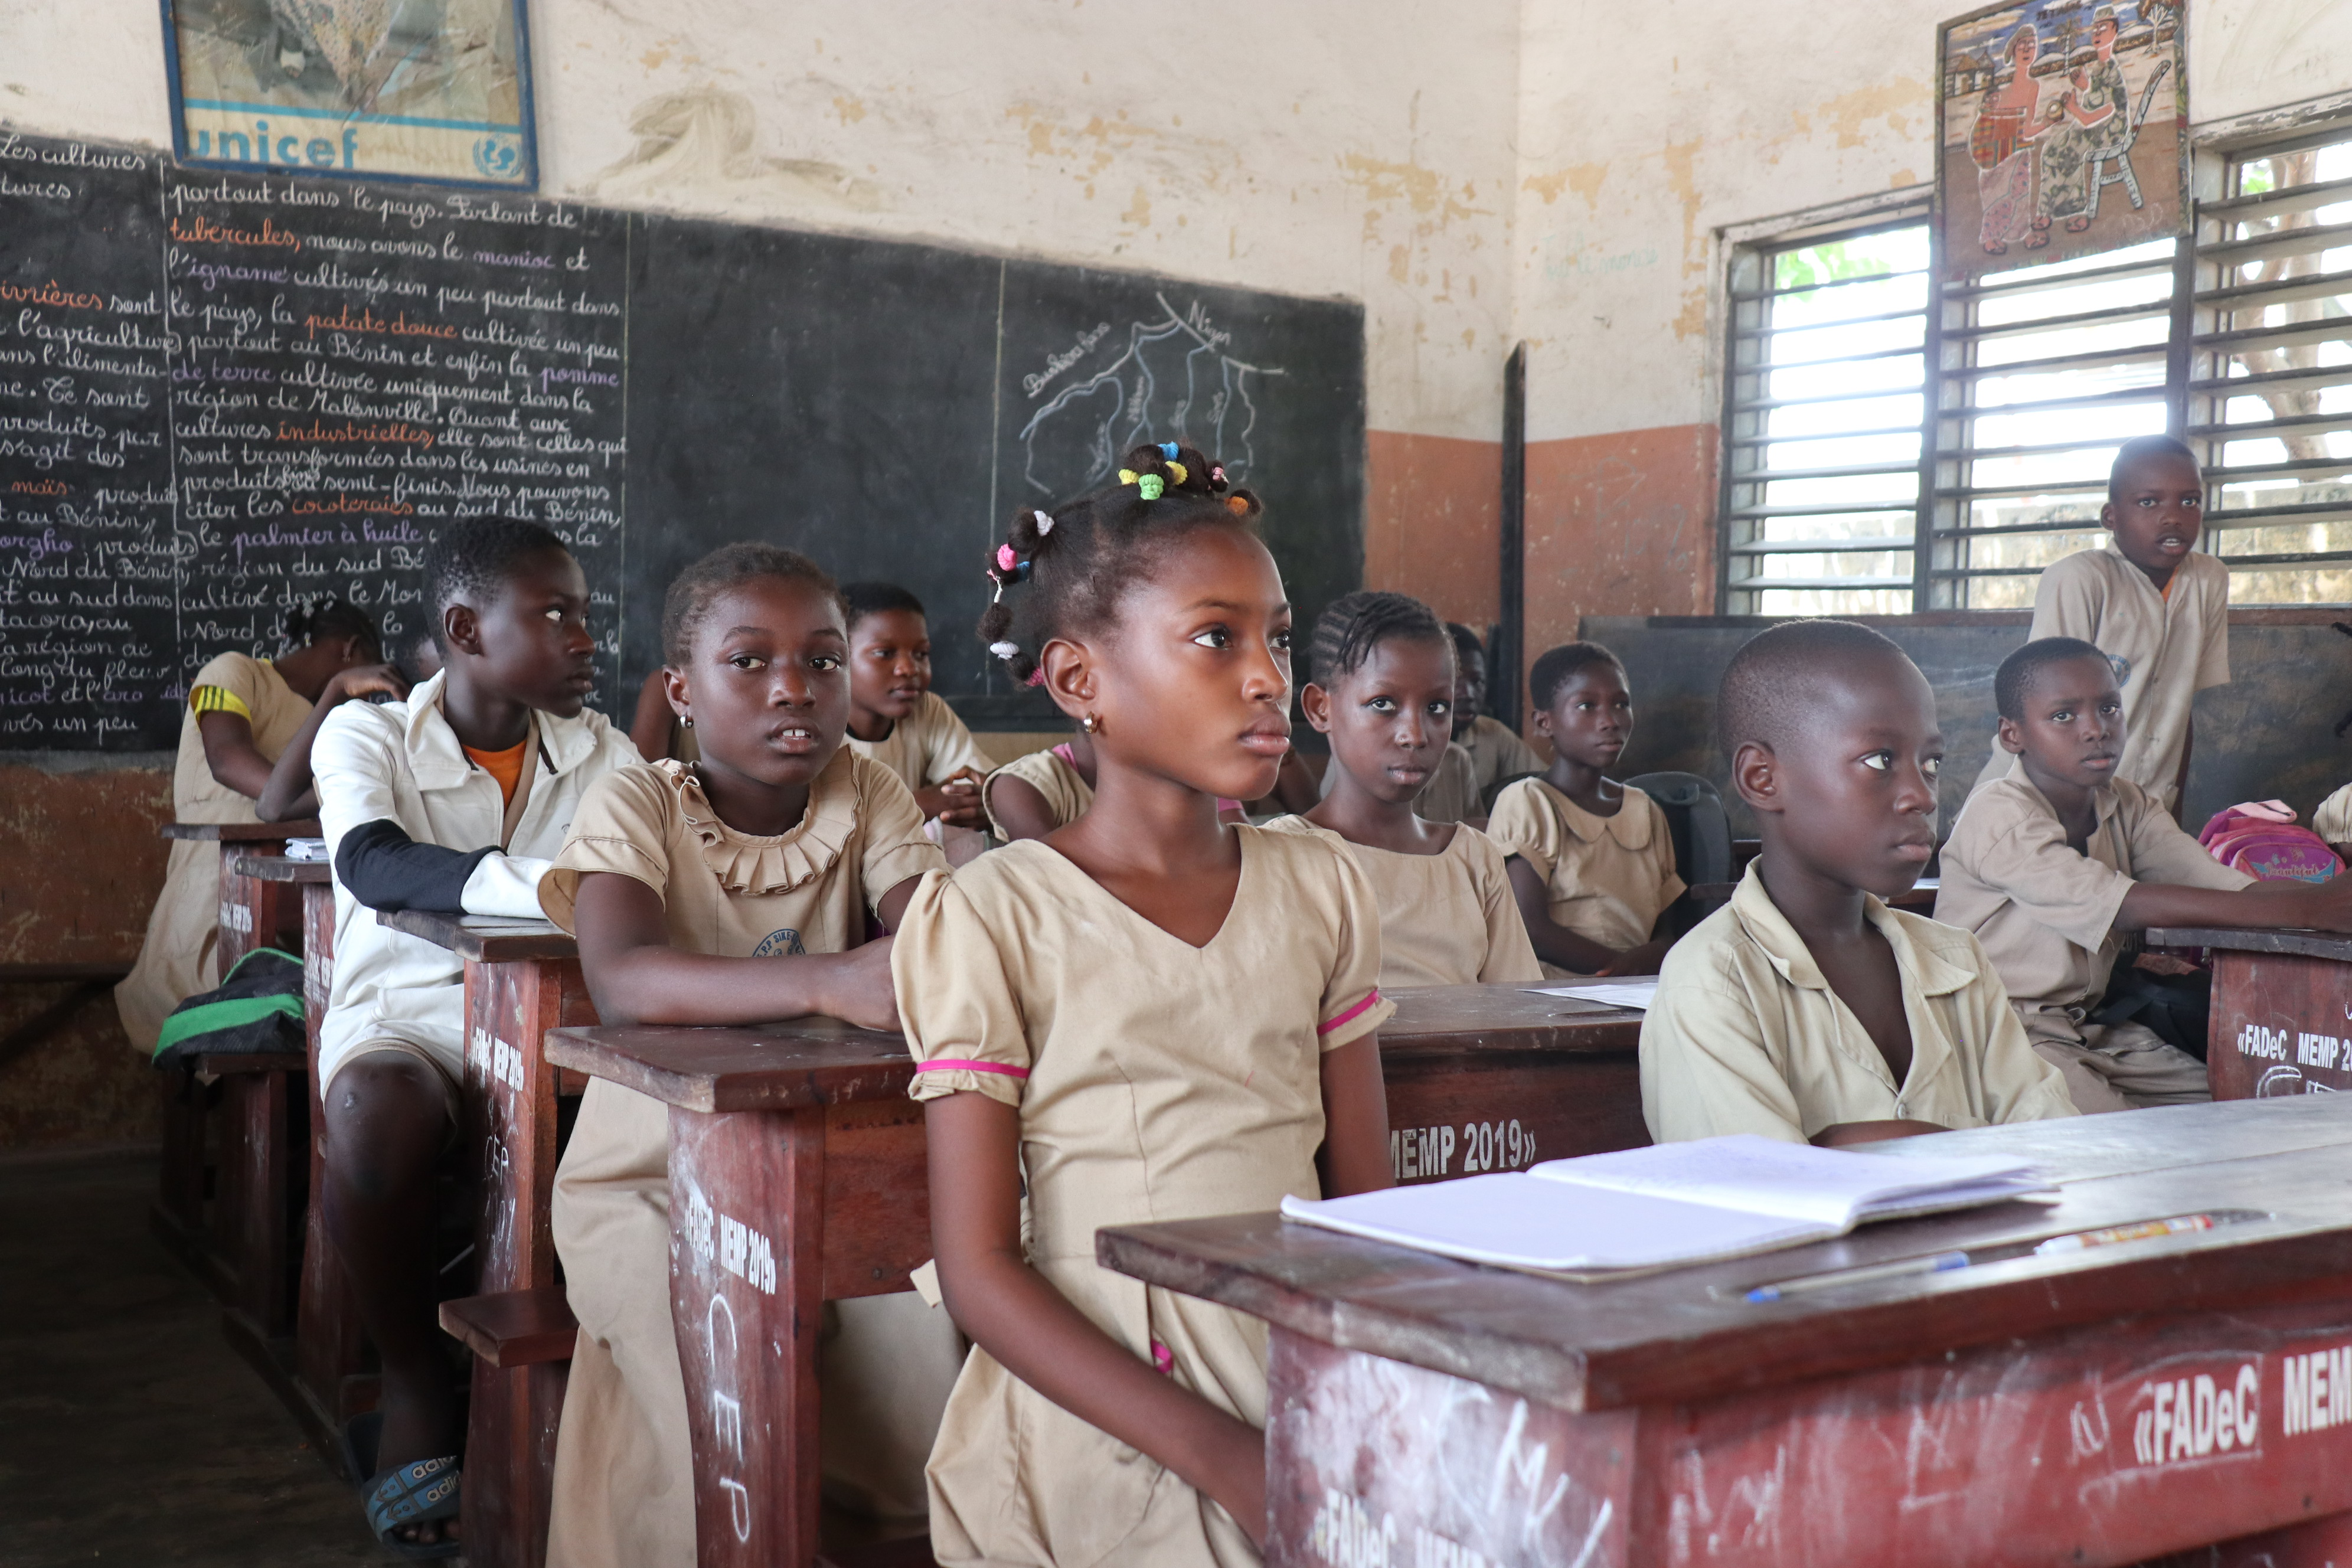 Slate reports on our work in Benin to combat taboos surrounding menstruation and encourage girls to go to school.